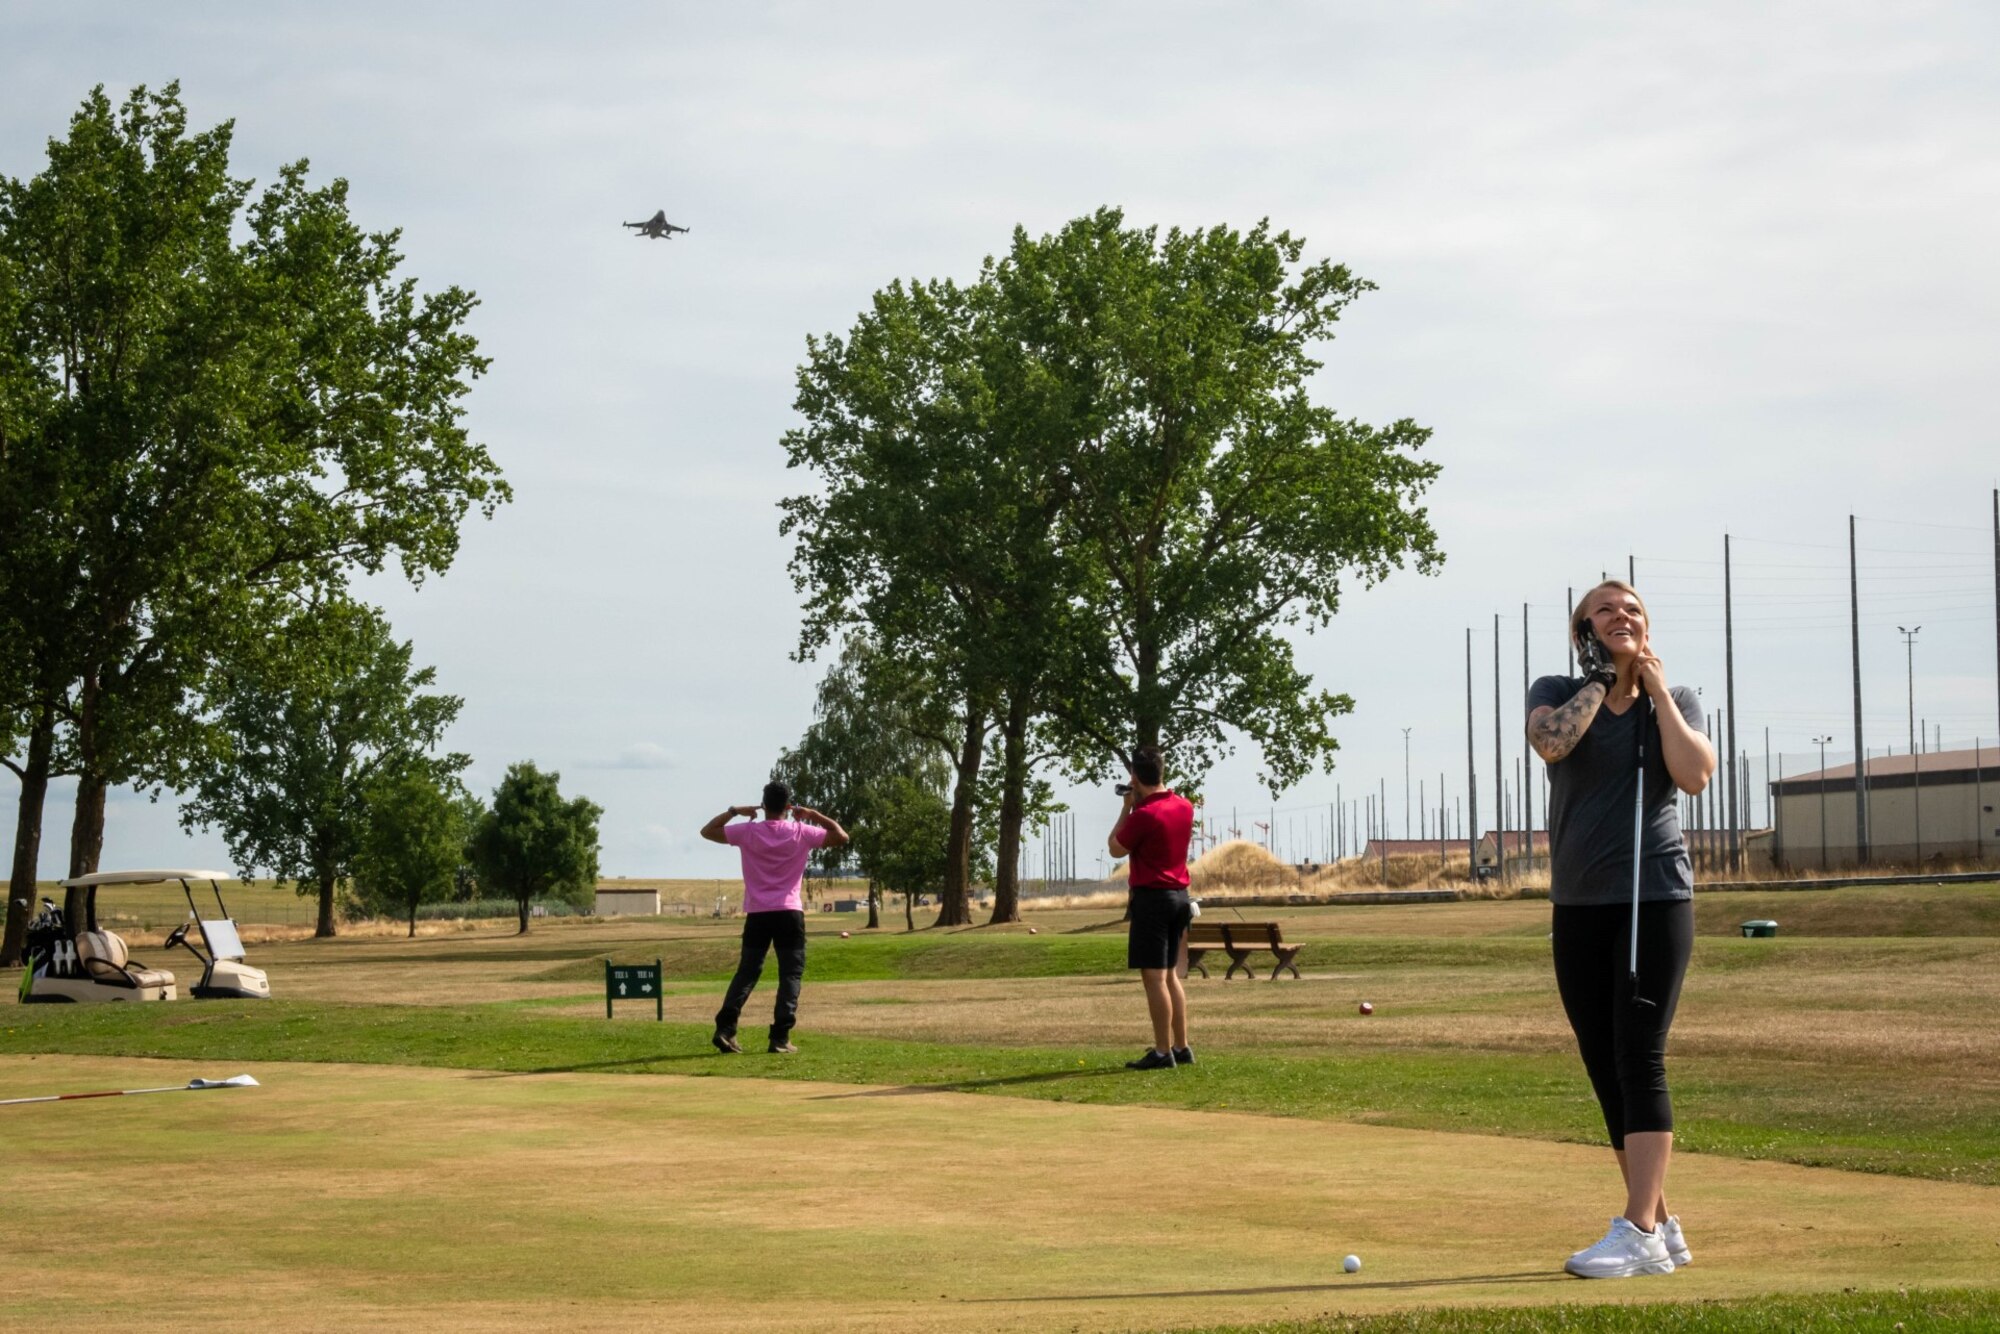 Participants of a golf tournament watch a U.S. Air Force F-16 Flying Falcon as it takes off .